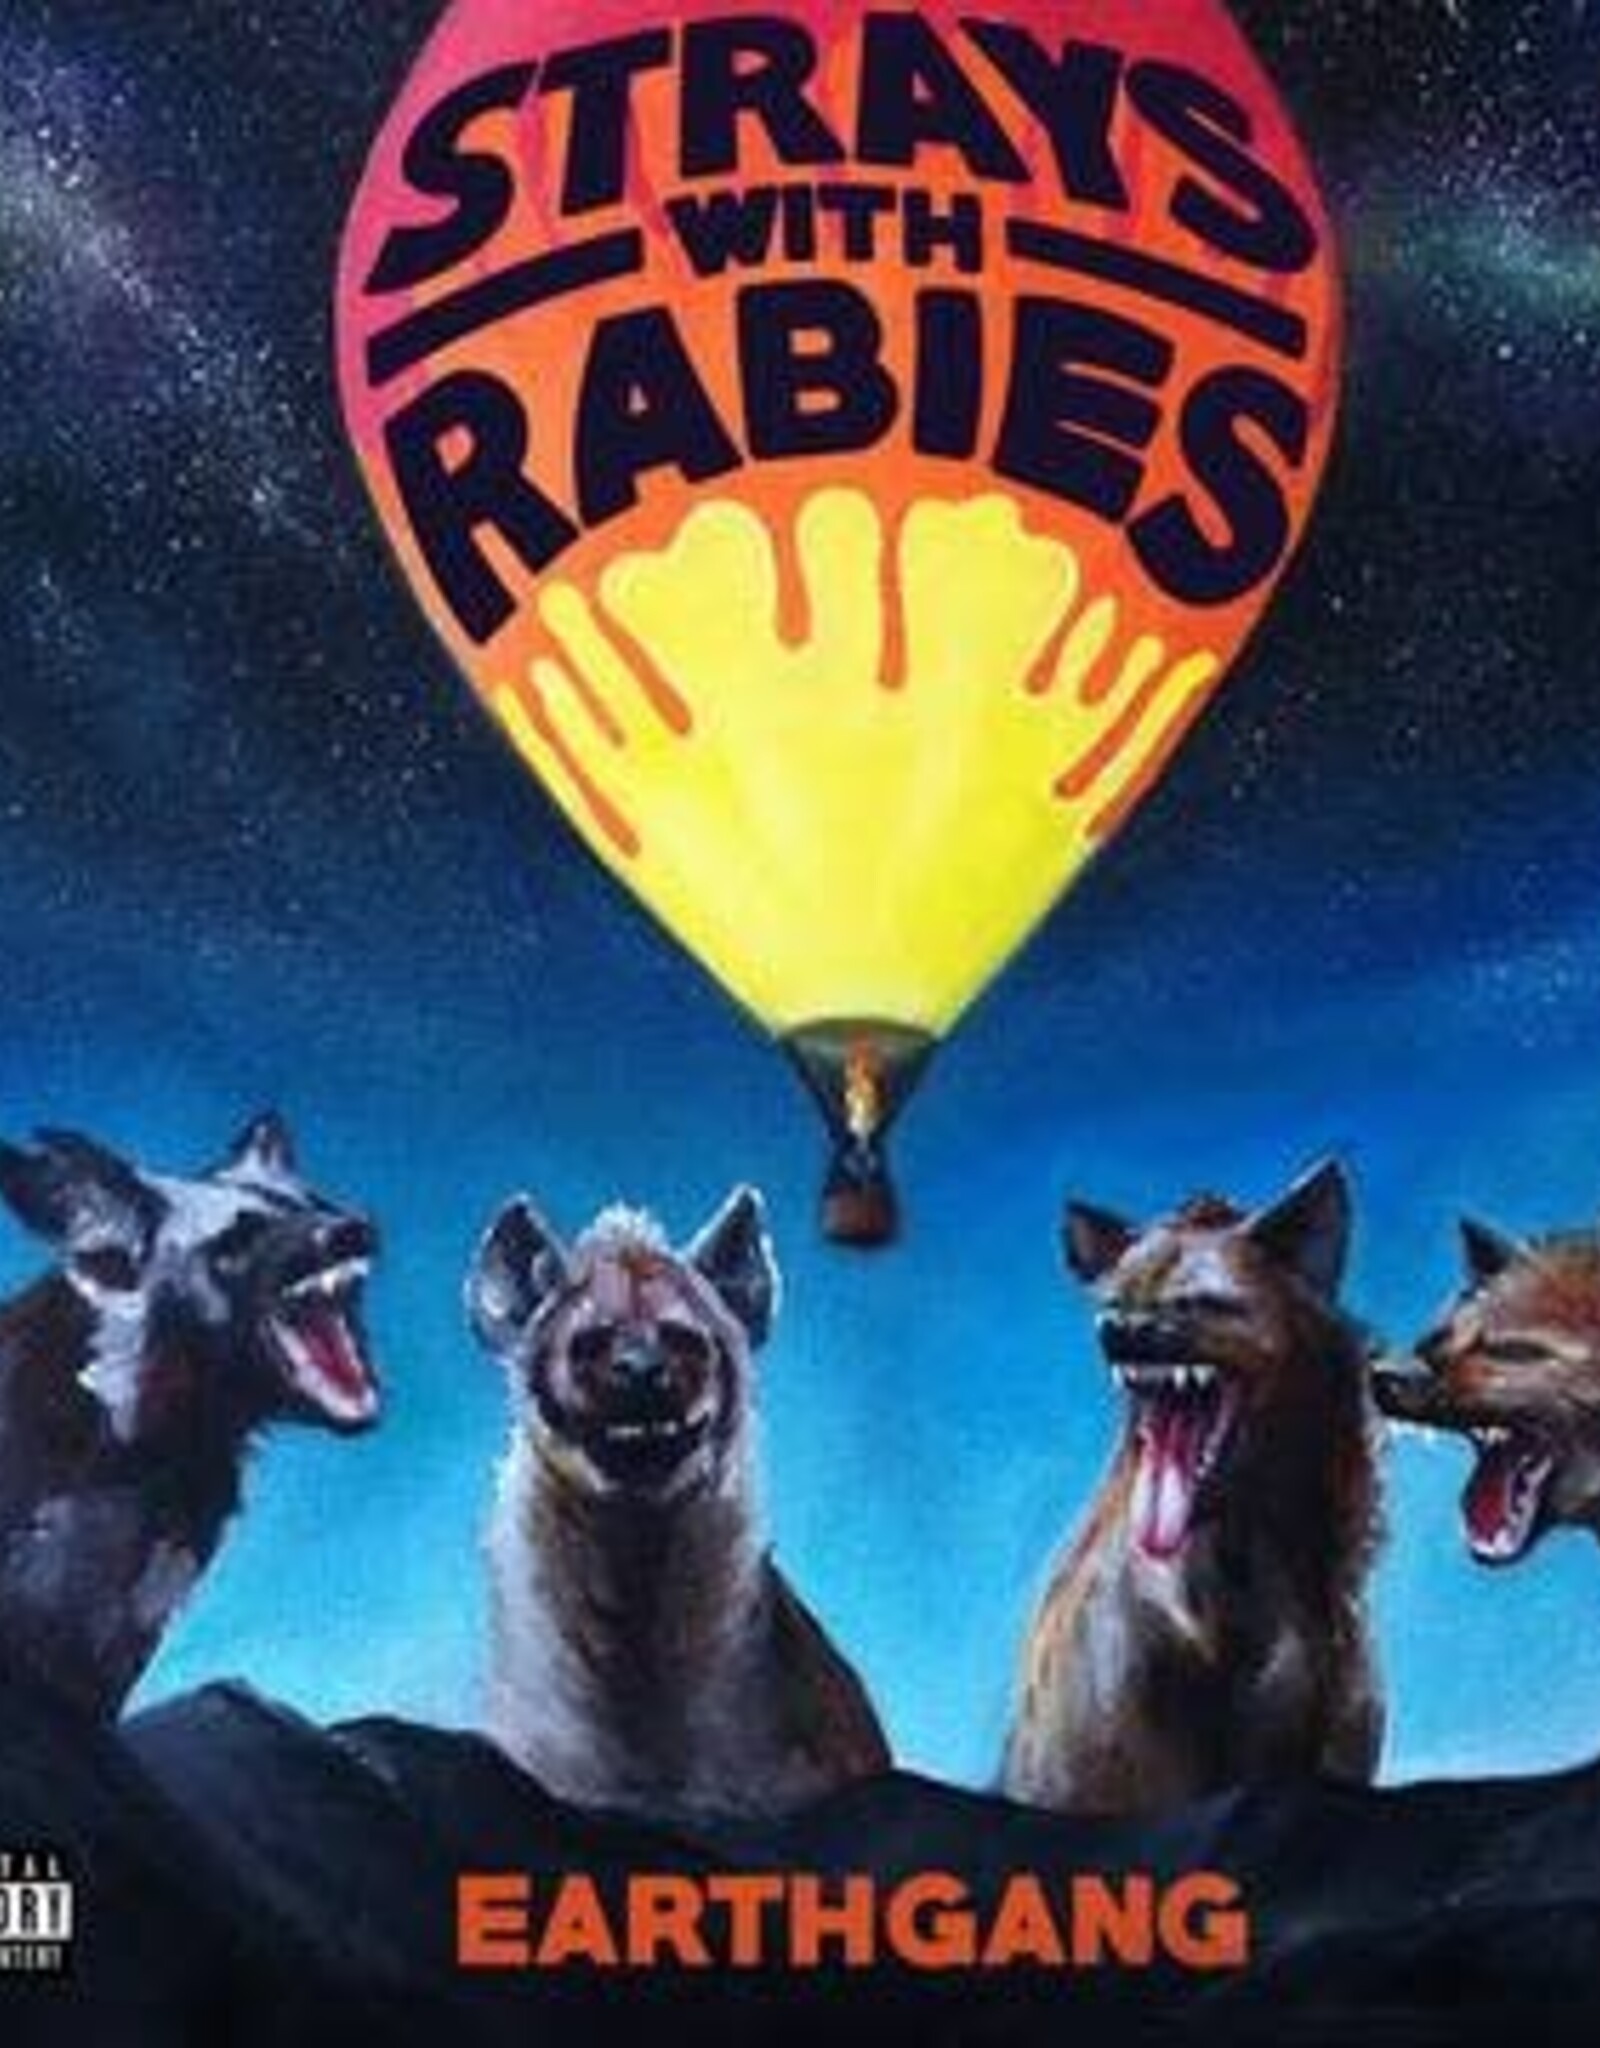 Earthgang - Strays with Rabies